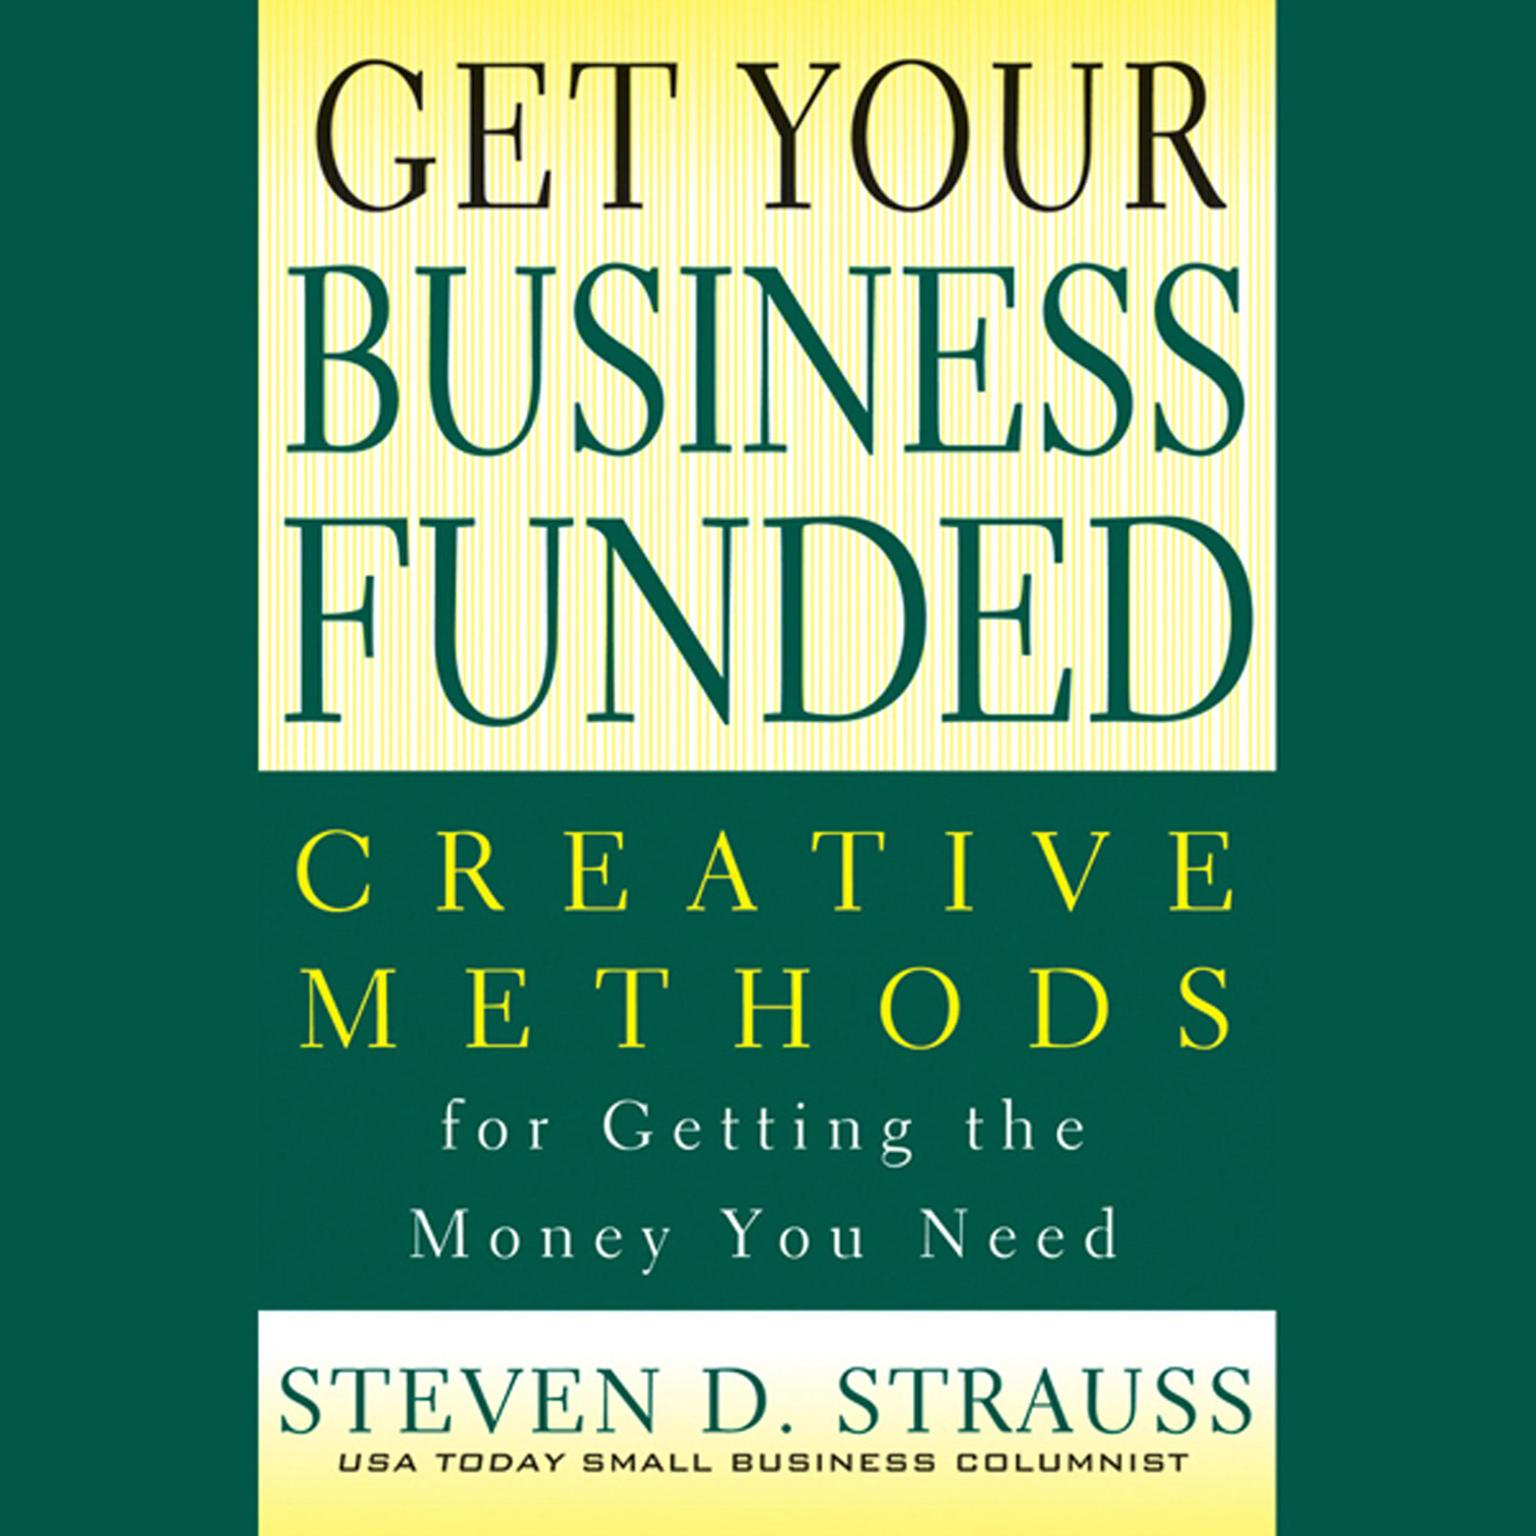 Get Your Business Funded: Creative Methods for Getting the Money You Need Audiobook, by Steven D. Strauss